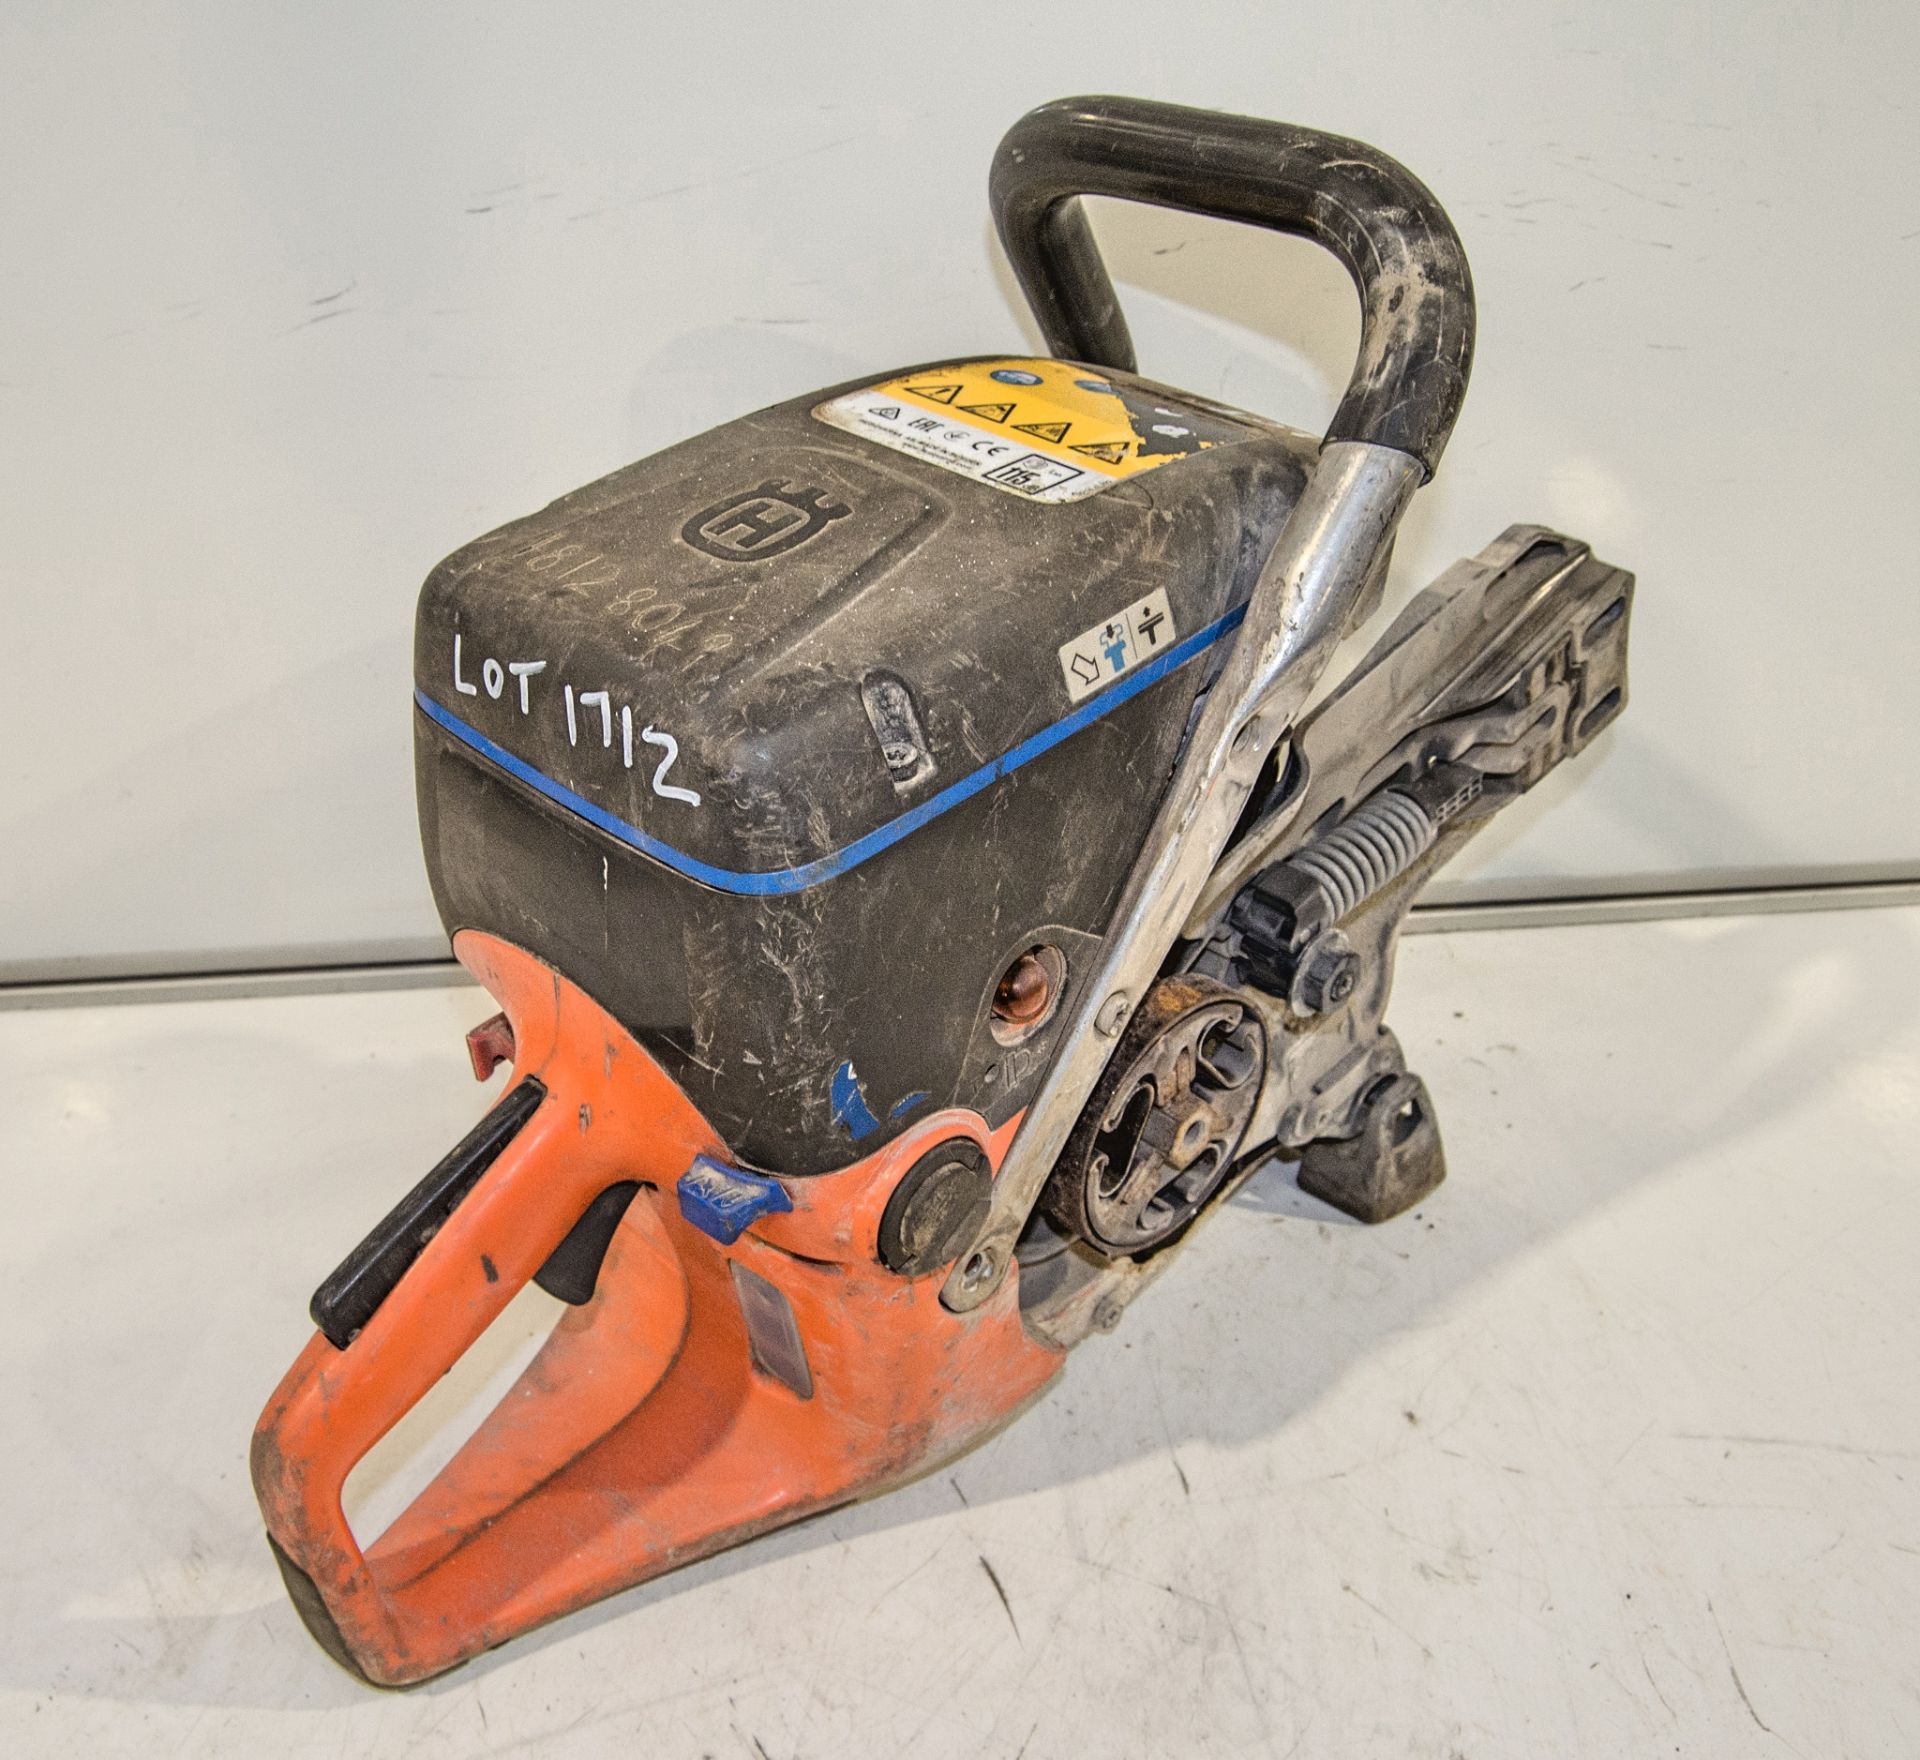 Husqvarna K760 petrol driven cut off saw for spares 18128049 - Image 2 of 2